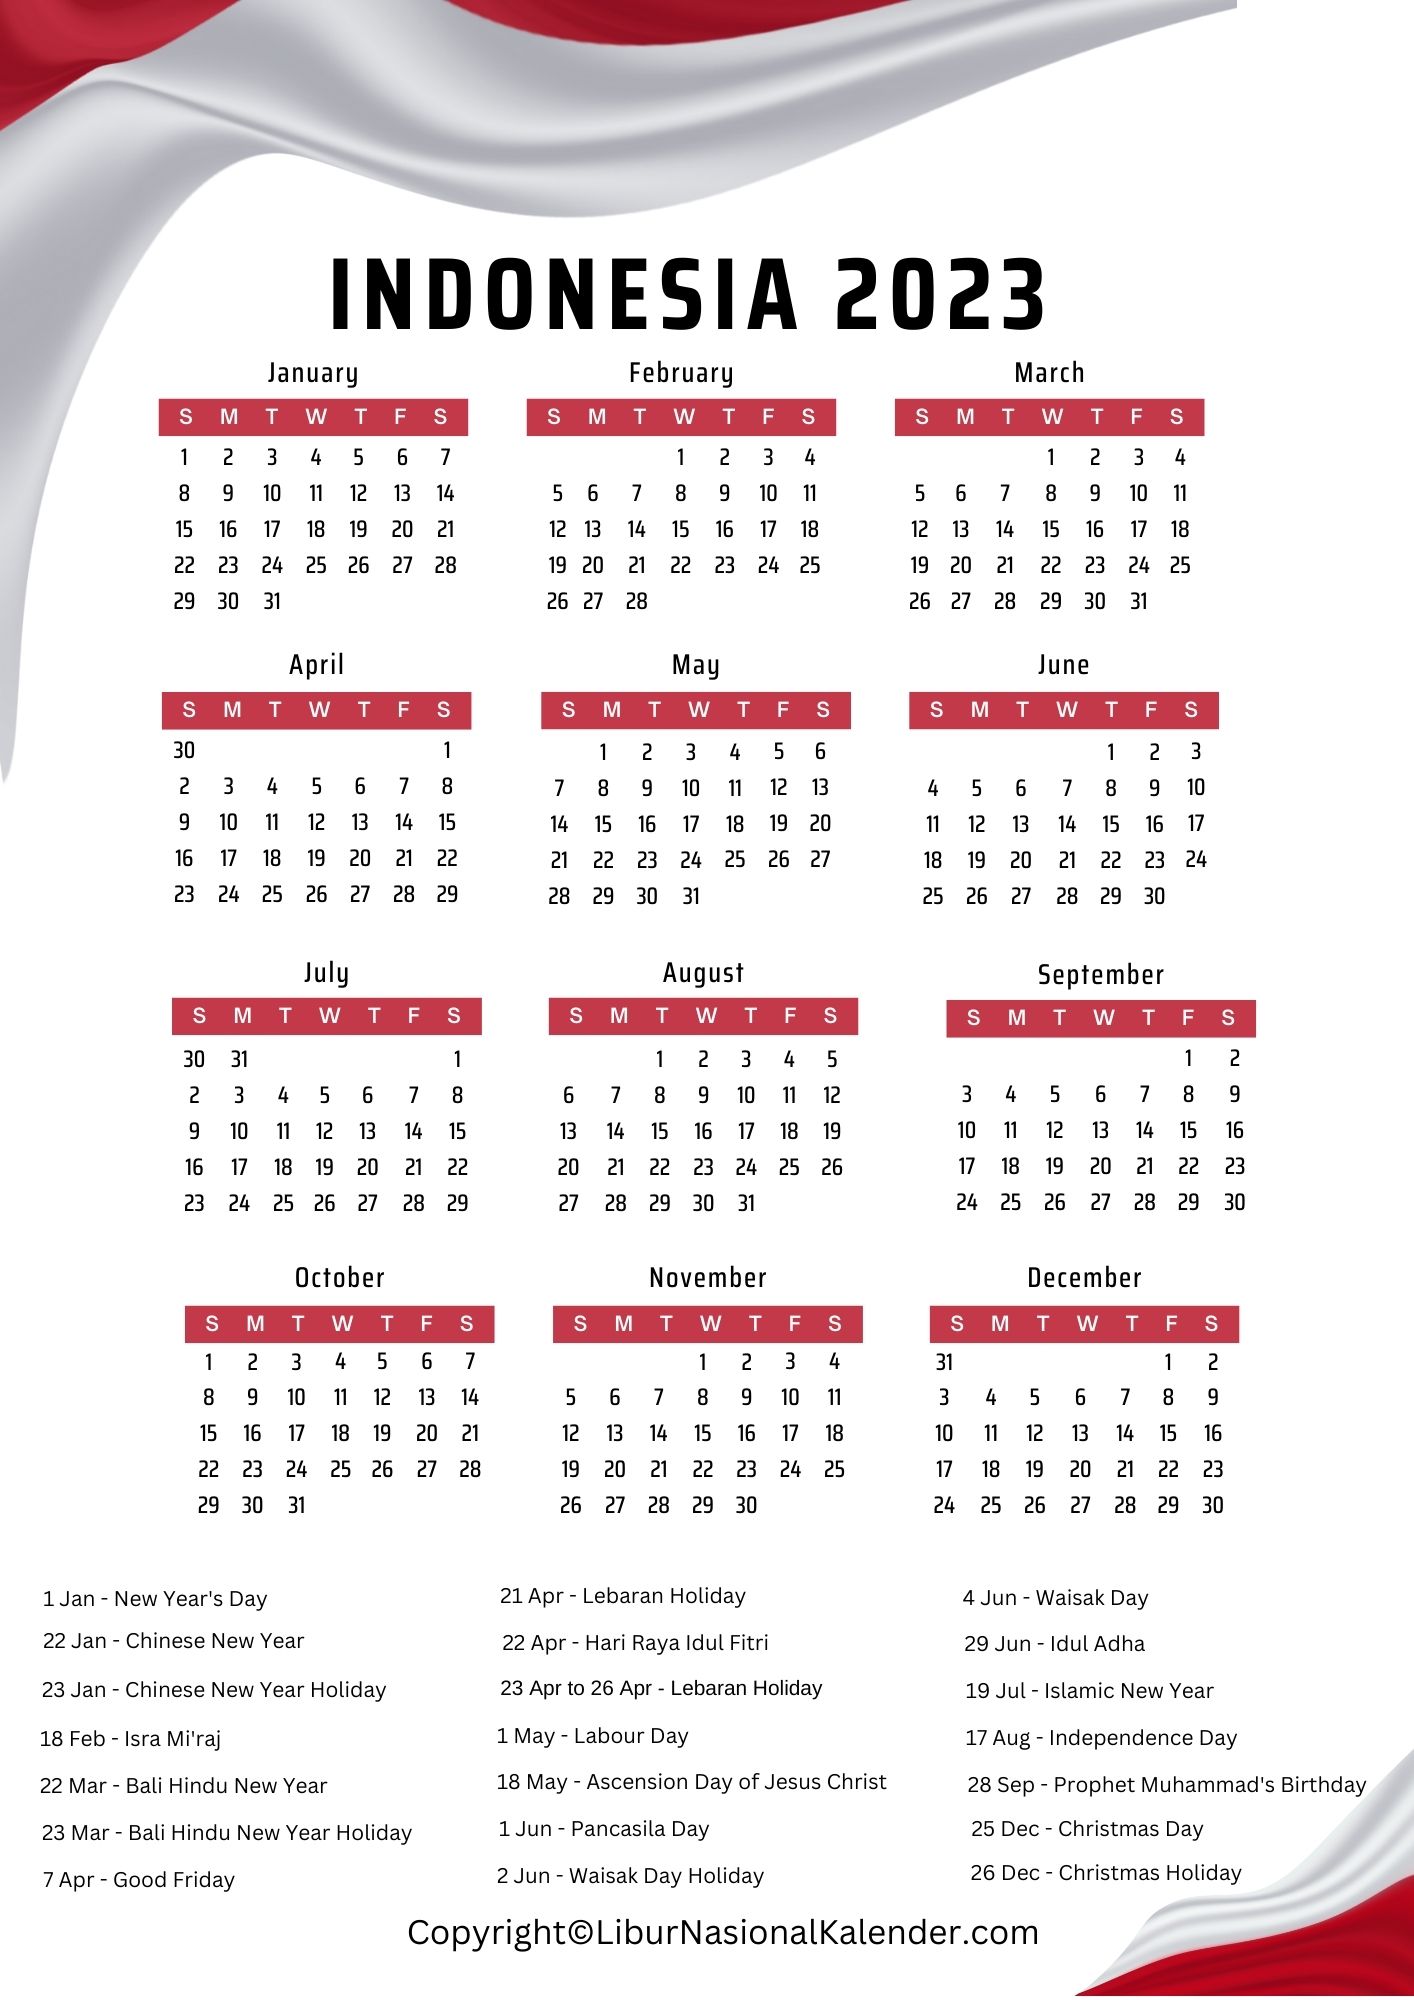 Indonesia Calendar 2023 with Holiday